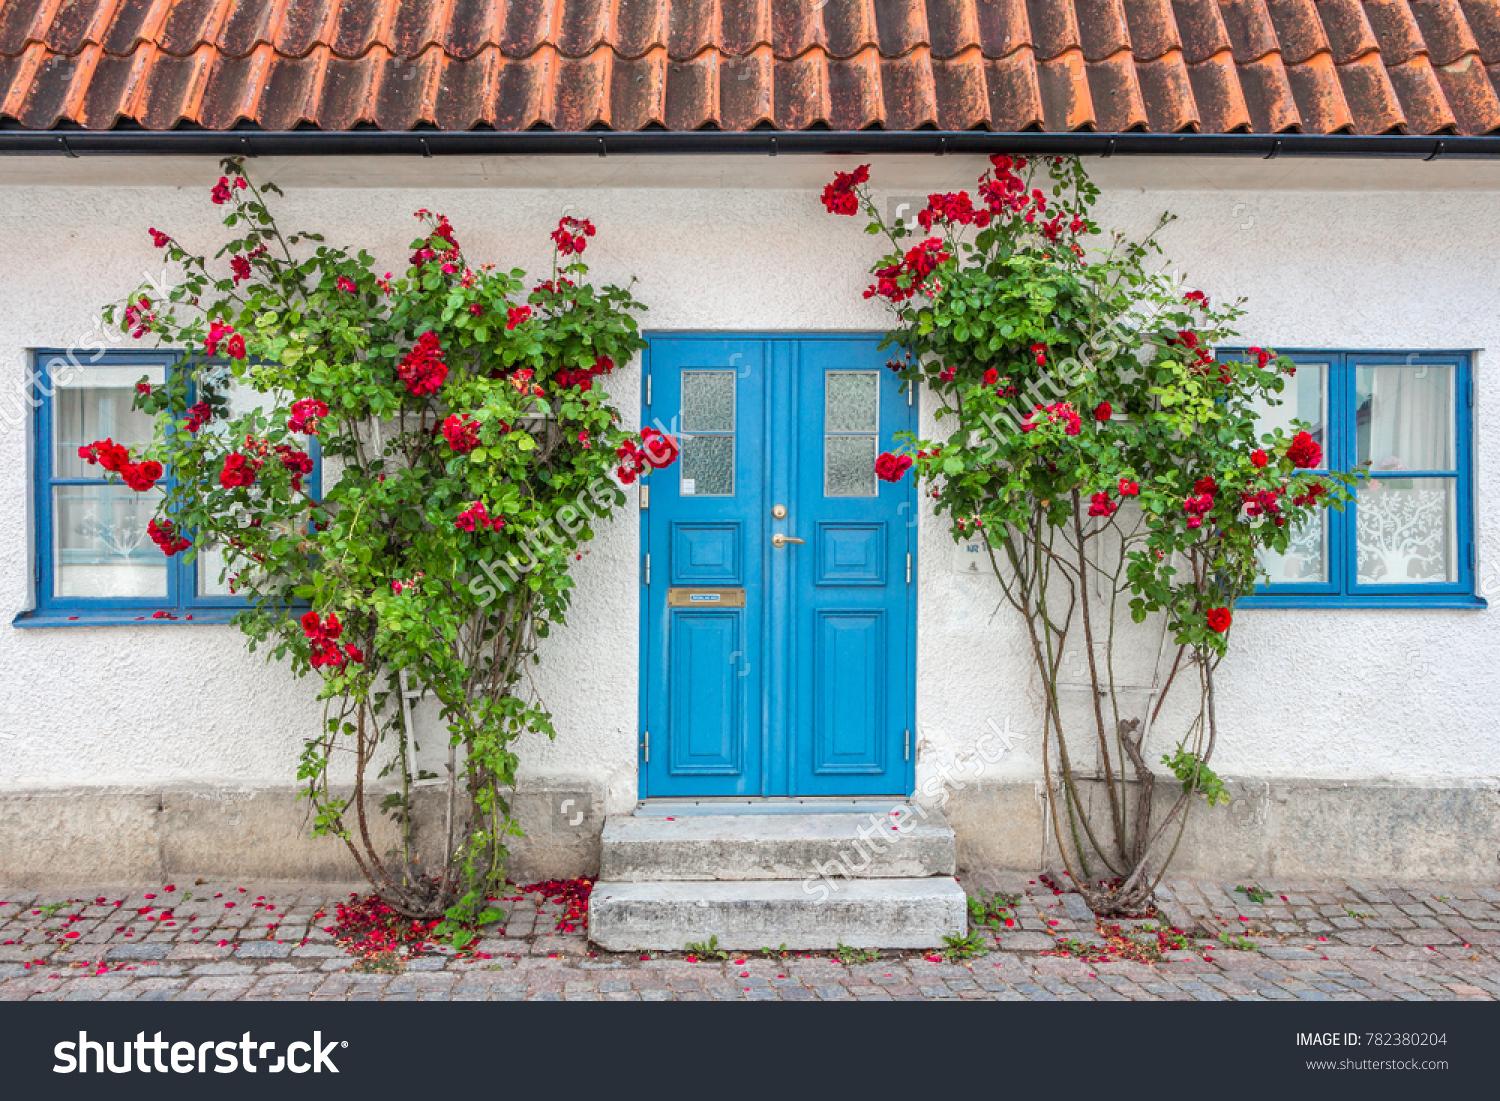 Beautiful views of Visby, main city on Gotland, island in Baltic Sea in Sweden.Best-preserved historical medieval city in Scandinavia. White stone house, windows with blue frames, red rose shrubs. #782380204